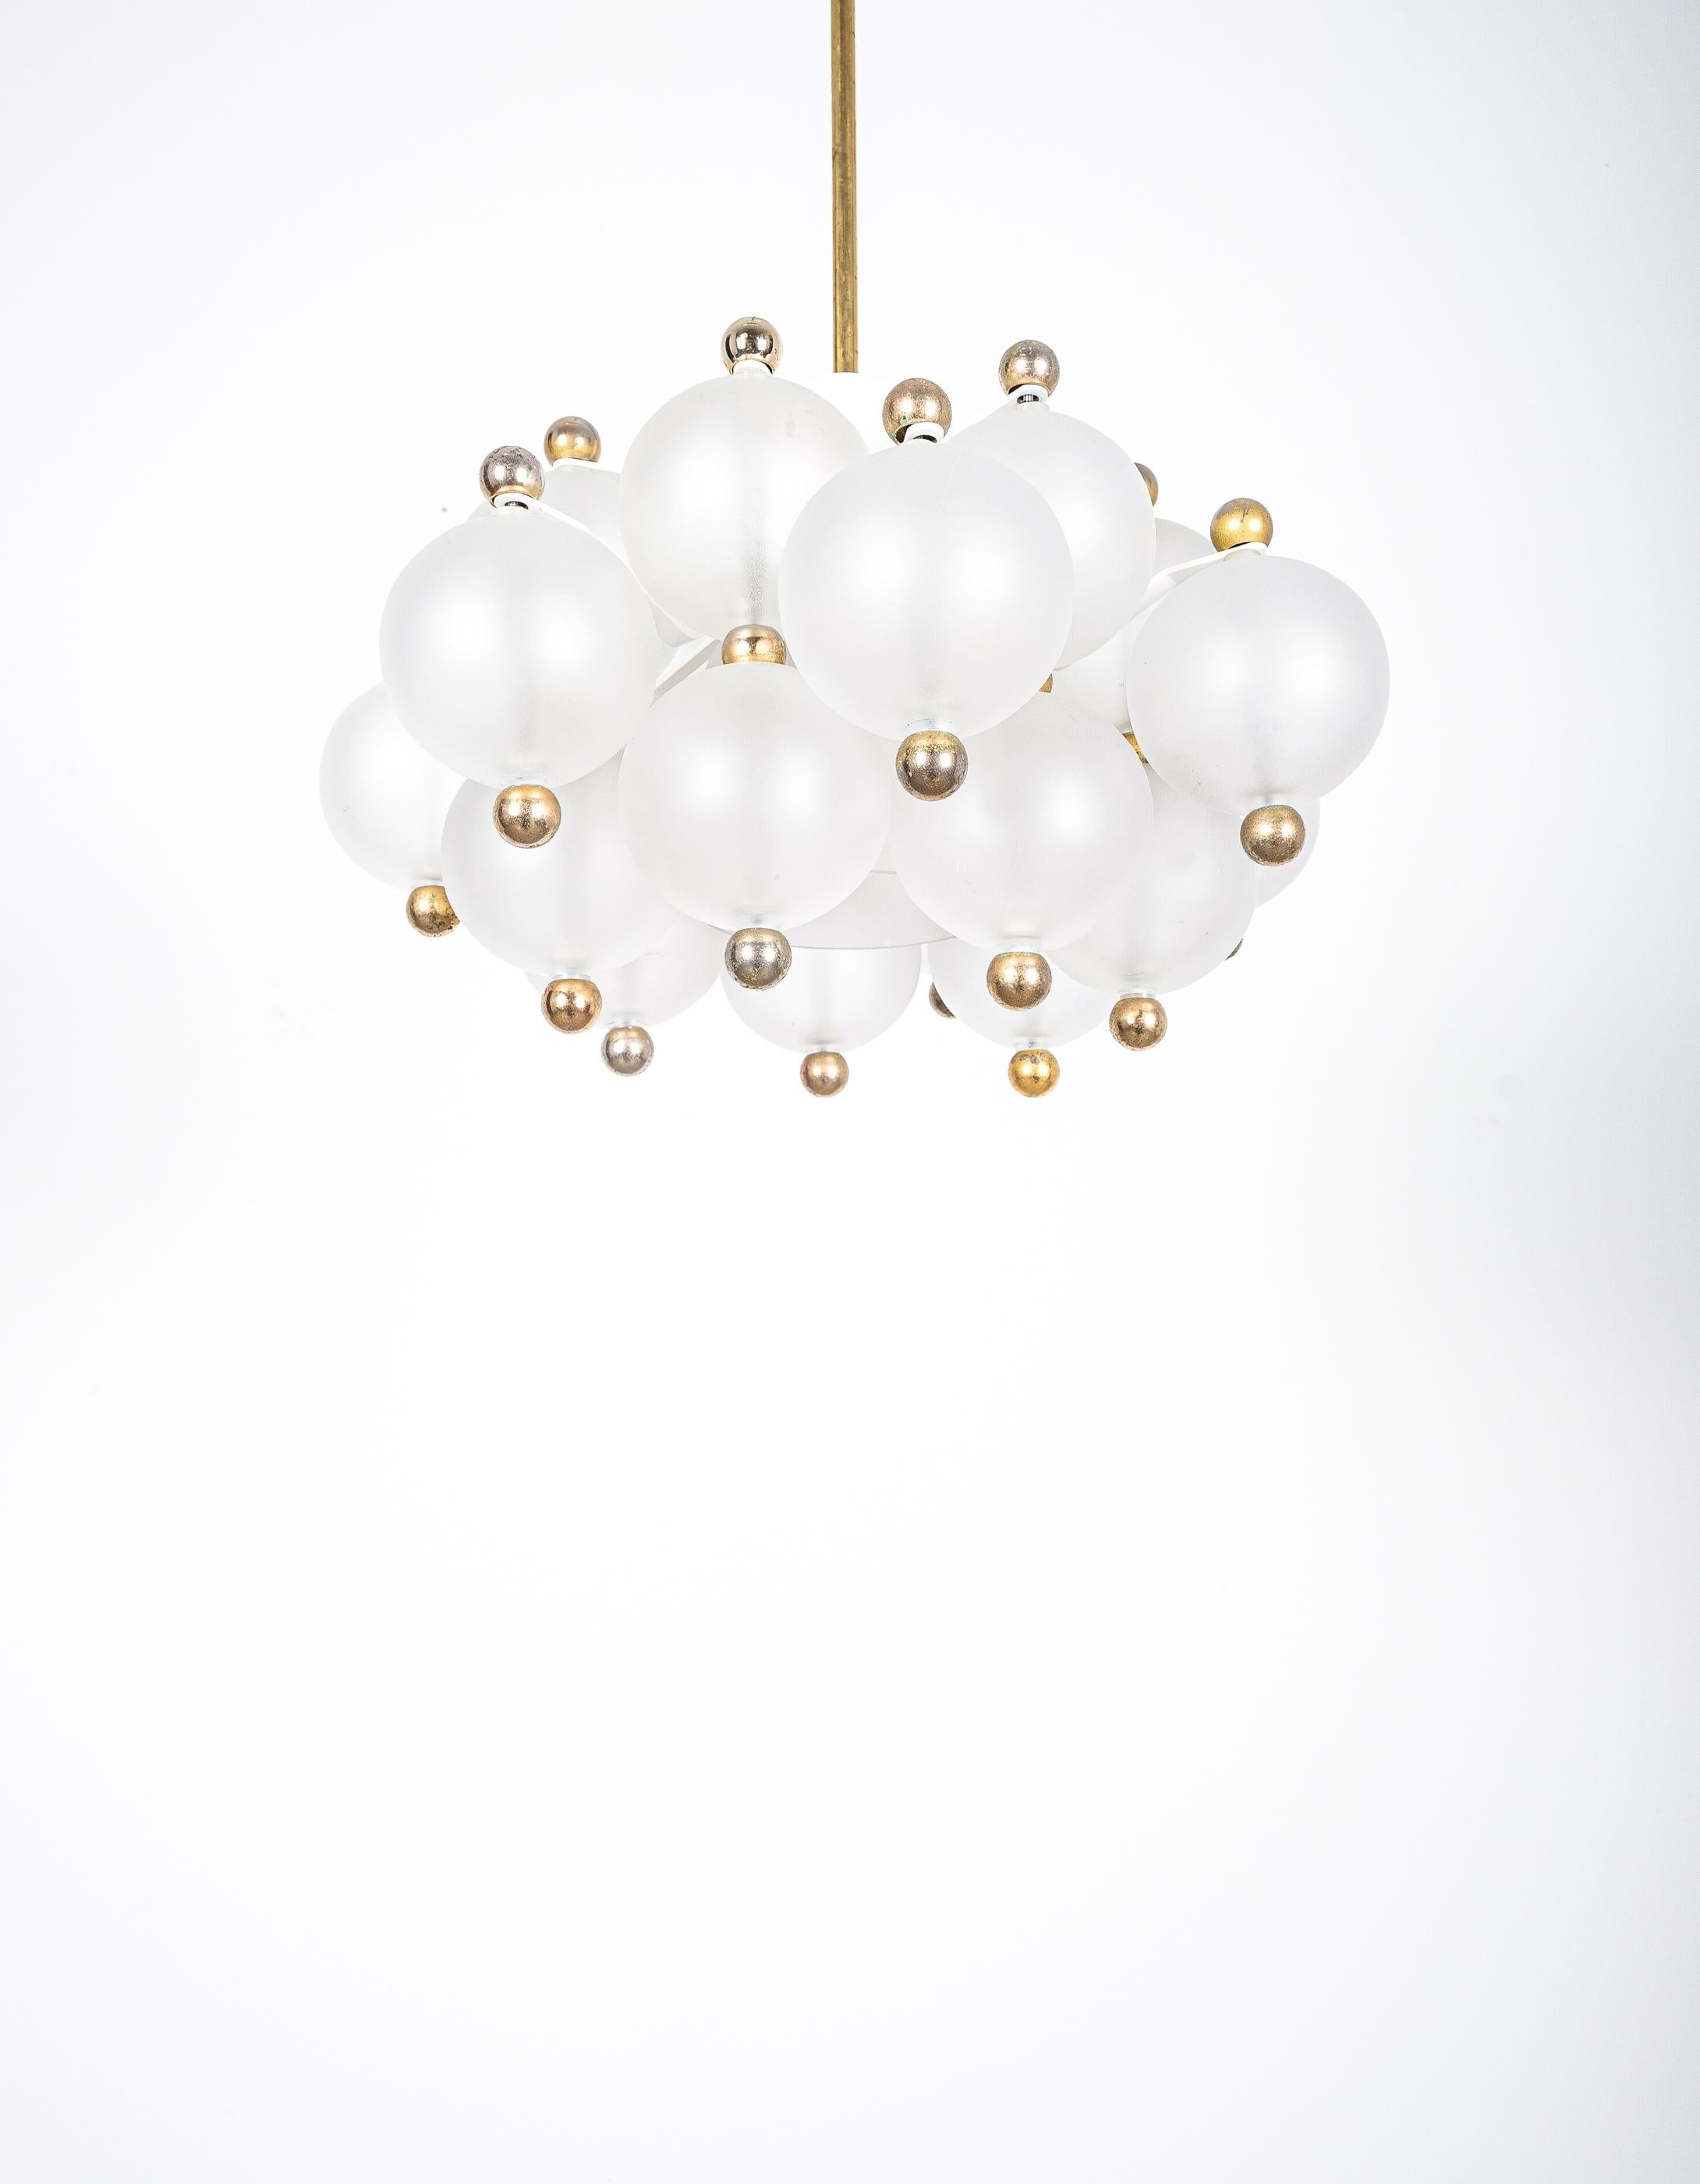 Late 20th Century Satin Glass Chandeliers '2' by Kinkeldey with Gold Knobs, circa 1970 For Sale